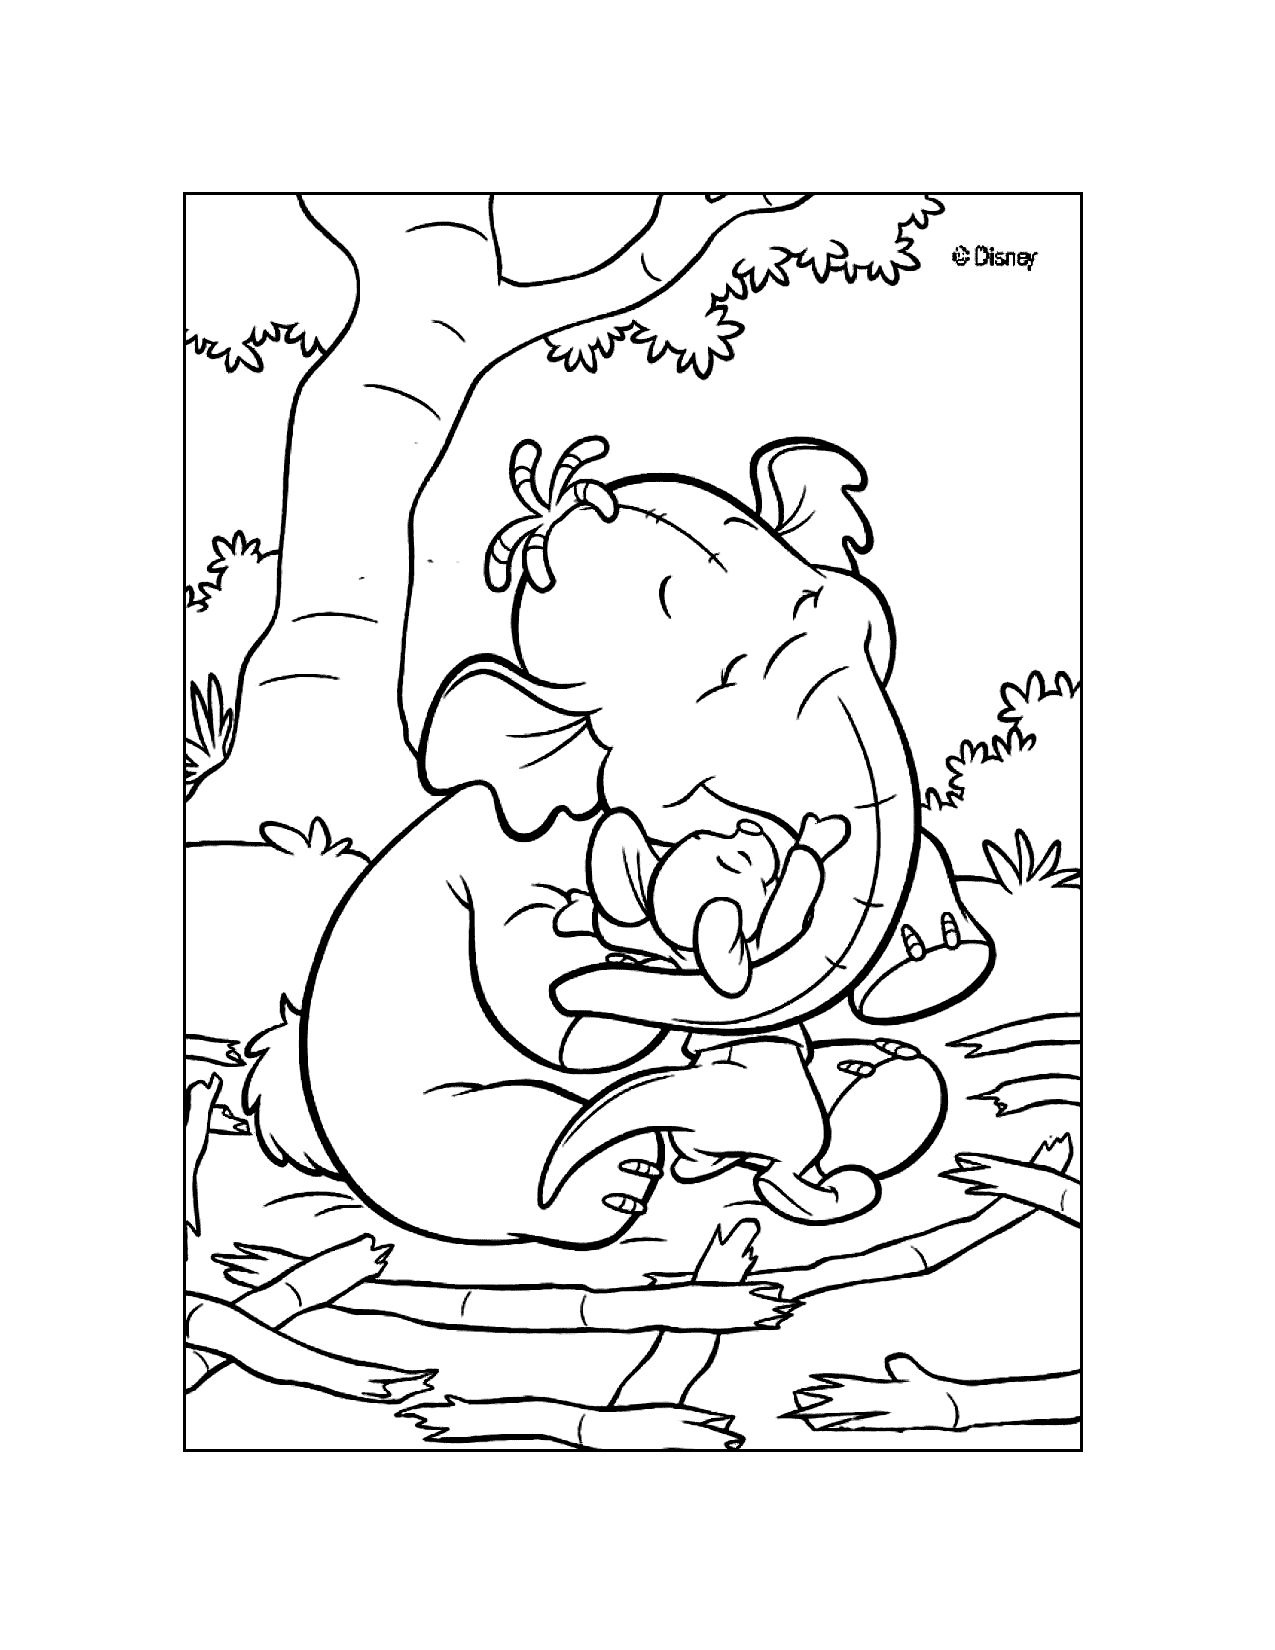 Heffalumps And Roo Coloring Page